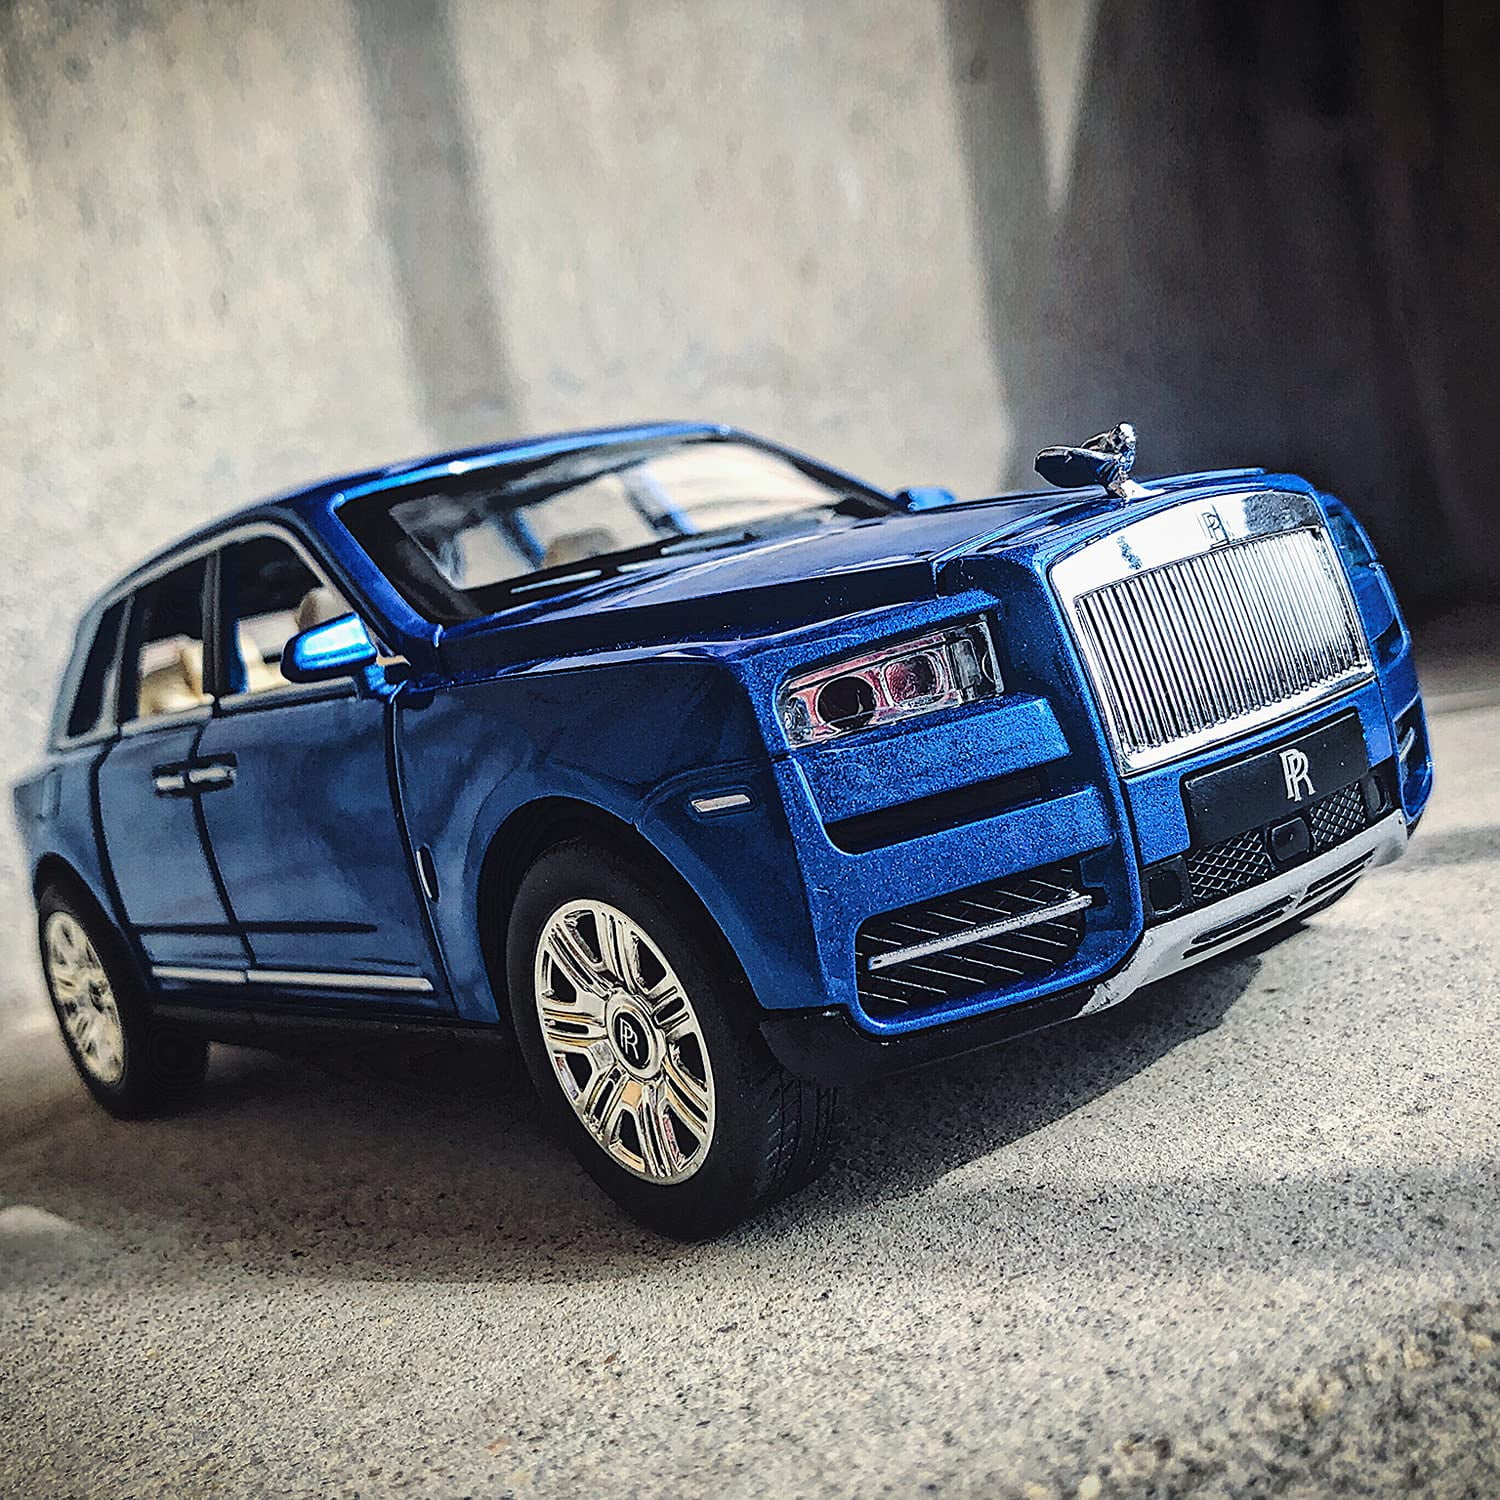  BDTCTK 1/24 Scale Rolls-Royce Cullinan SUV Model Car Toy, Zinc  Alloy Pull Back Diecast Toy Cars with Sound and Light for Kids Boy Girl  Gift(Blue) : Toys & Games